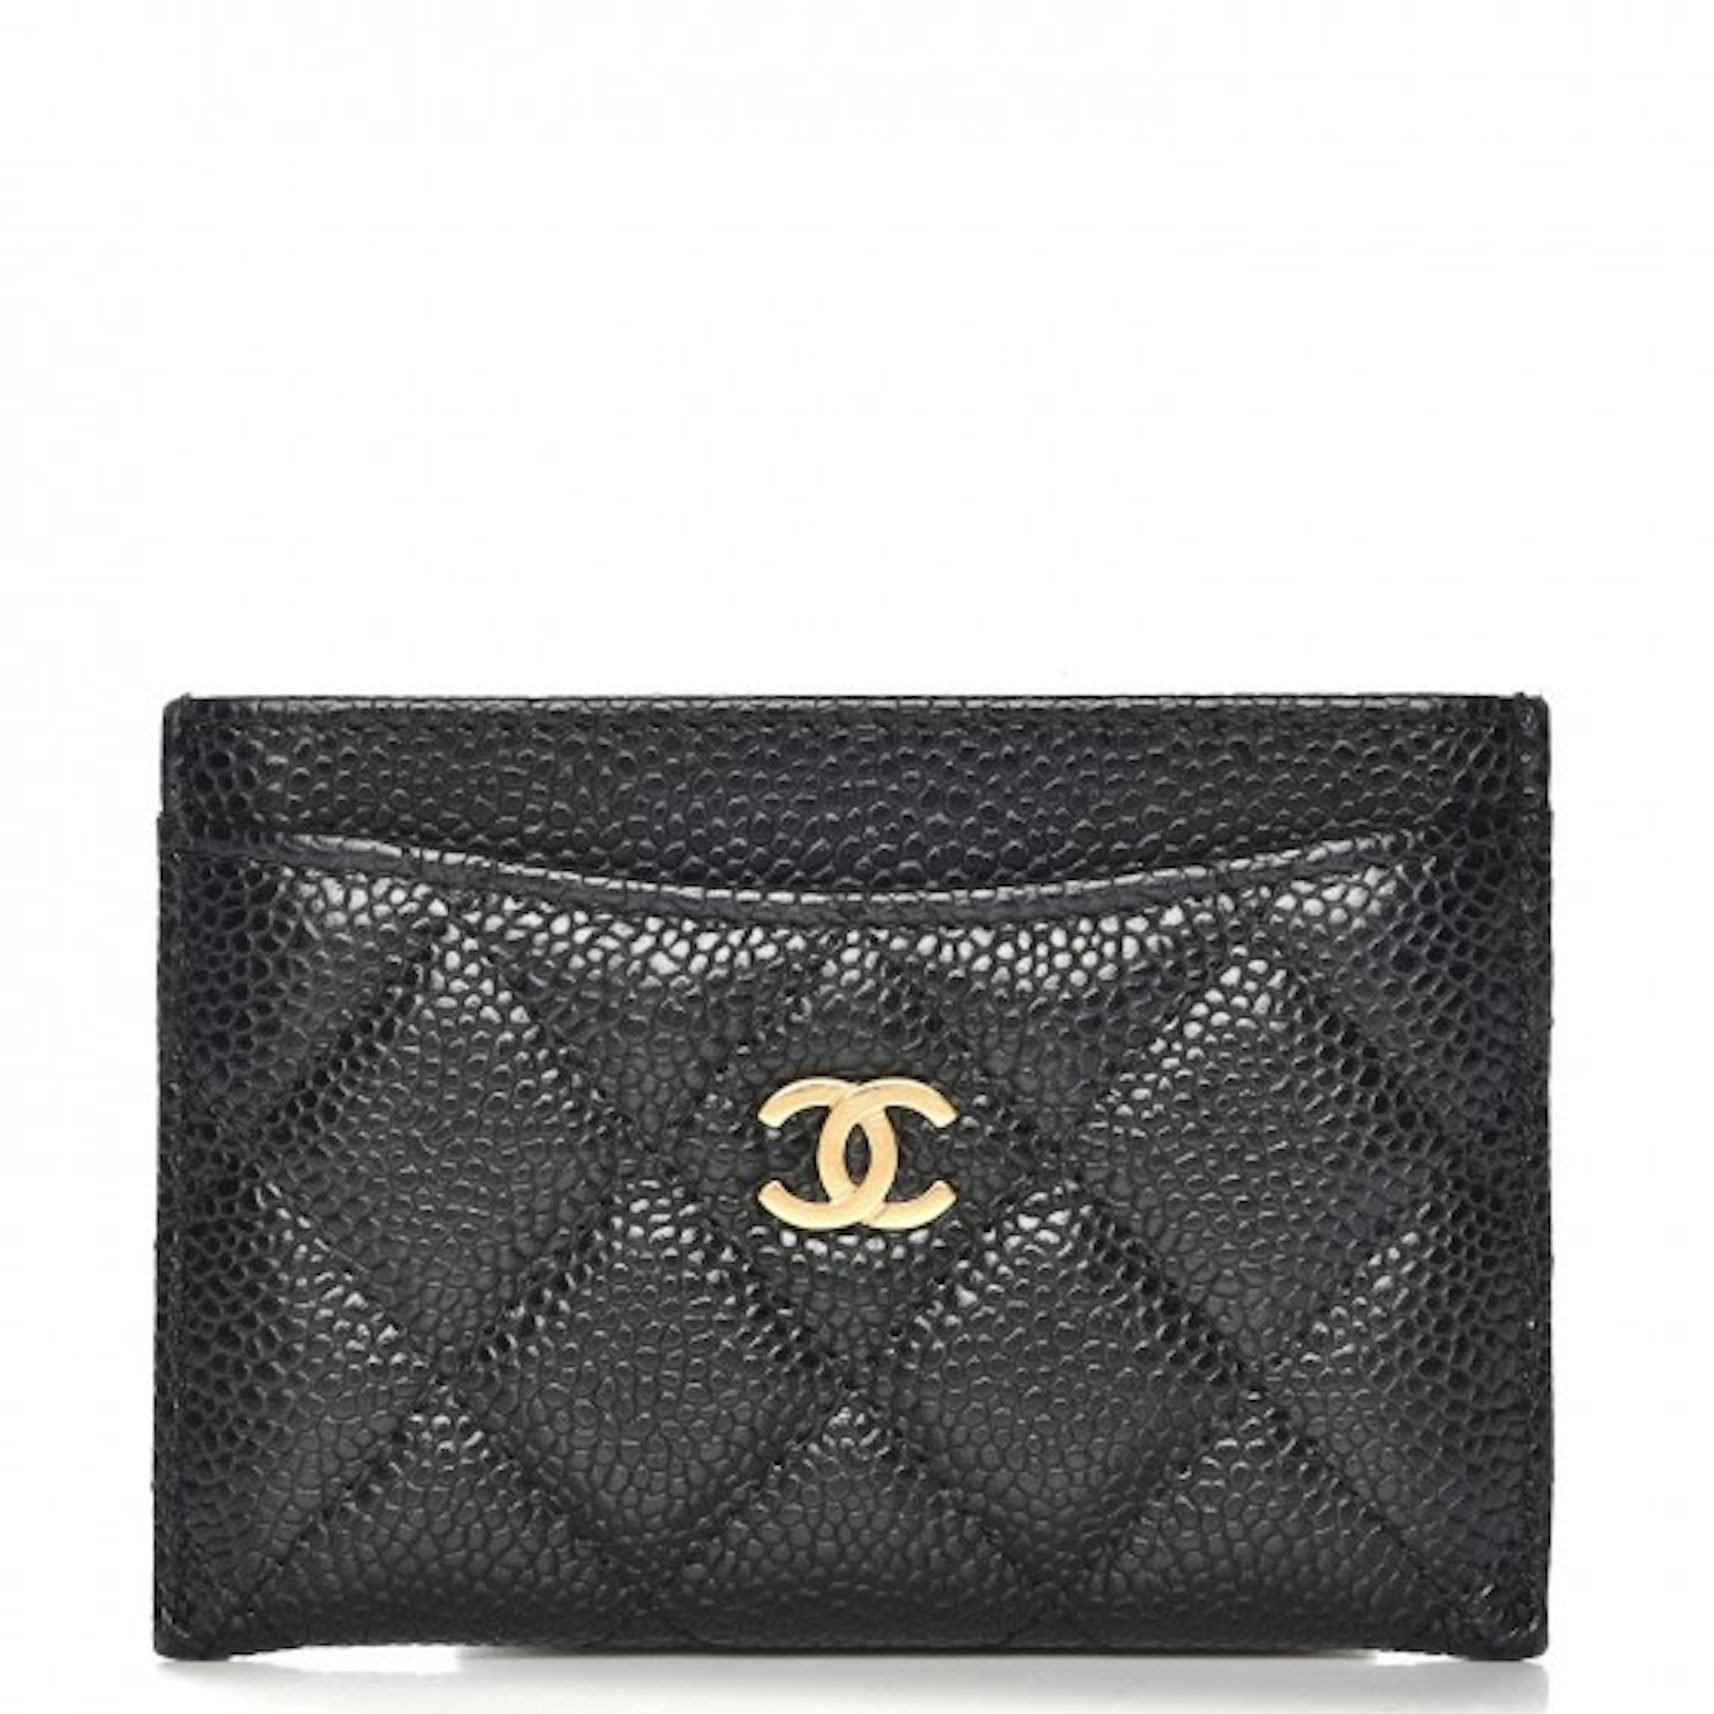 Credit Card Holder Collection Part 1/2: FENDI, CHANEL, LOUIS